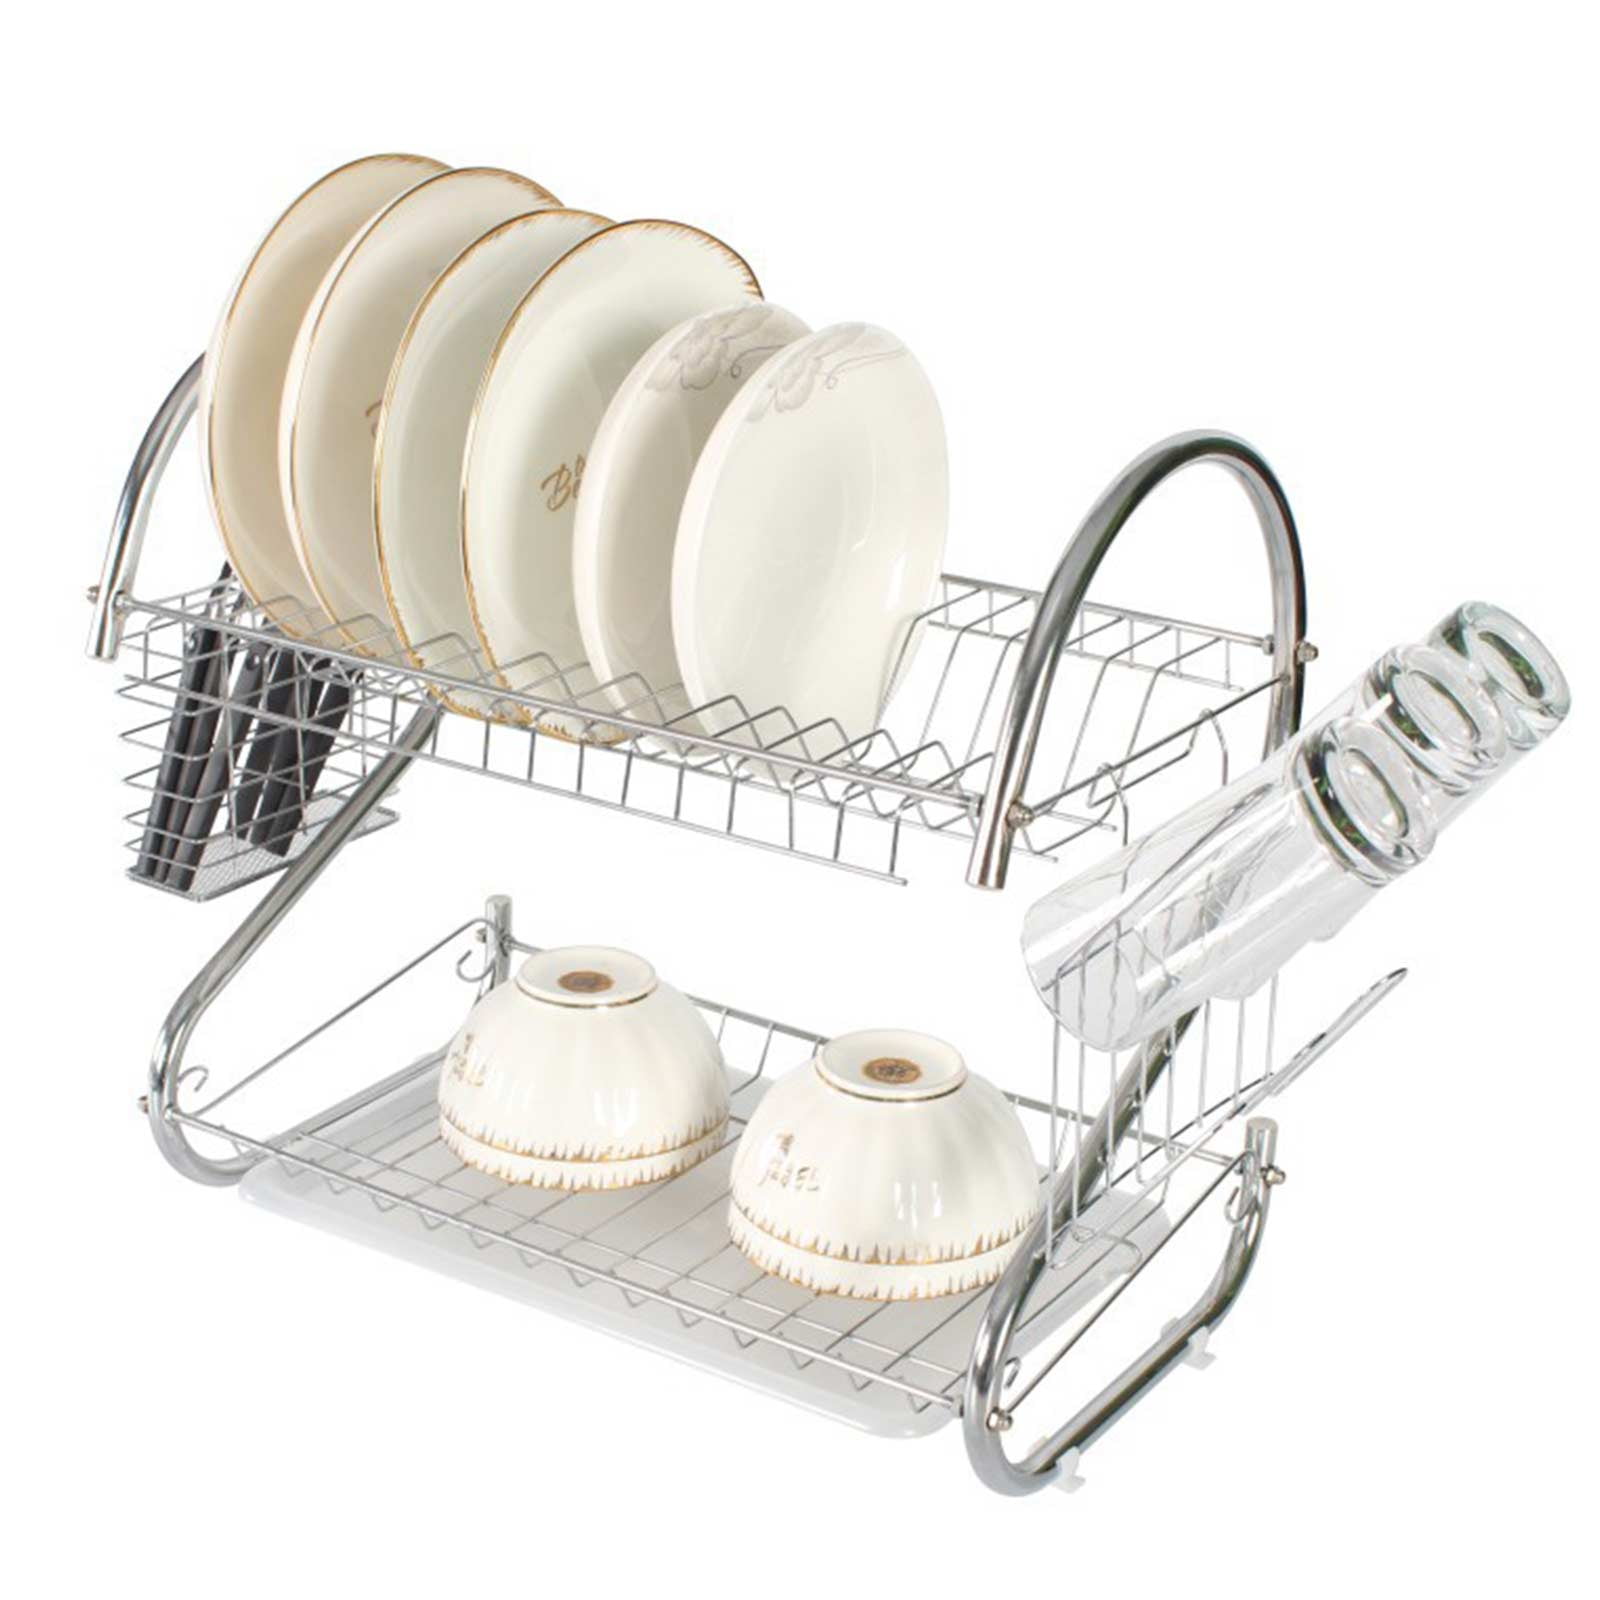  DUANFEE Dish Drying Rack - 2 Tier Small Dish Racks for Kitchen  Counter, Dish Drainer with Utensil Holder, Glass Holder and Drainboard,  Multifunctional Dish Dryer Rack(Black,Metal) : Everything Else